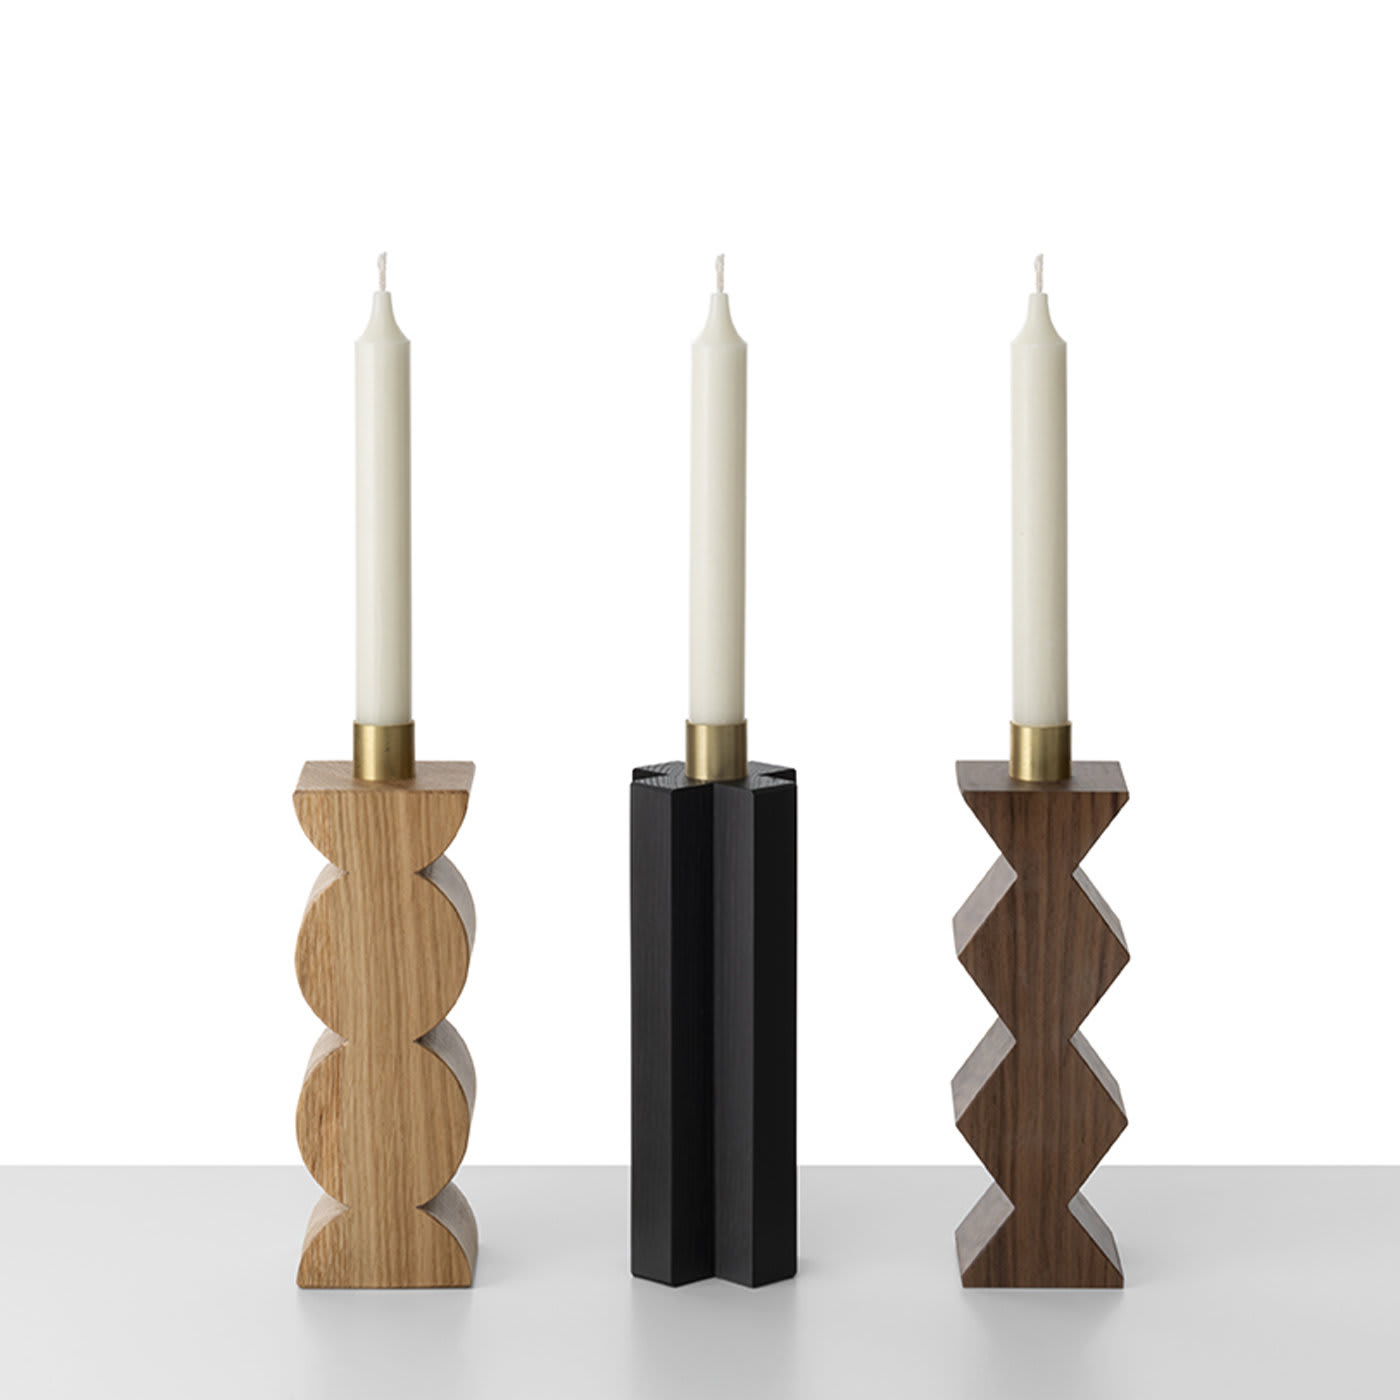 Constantin Walnut Candle Holder by Agustina Bottoni - Colé